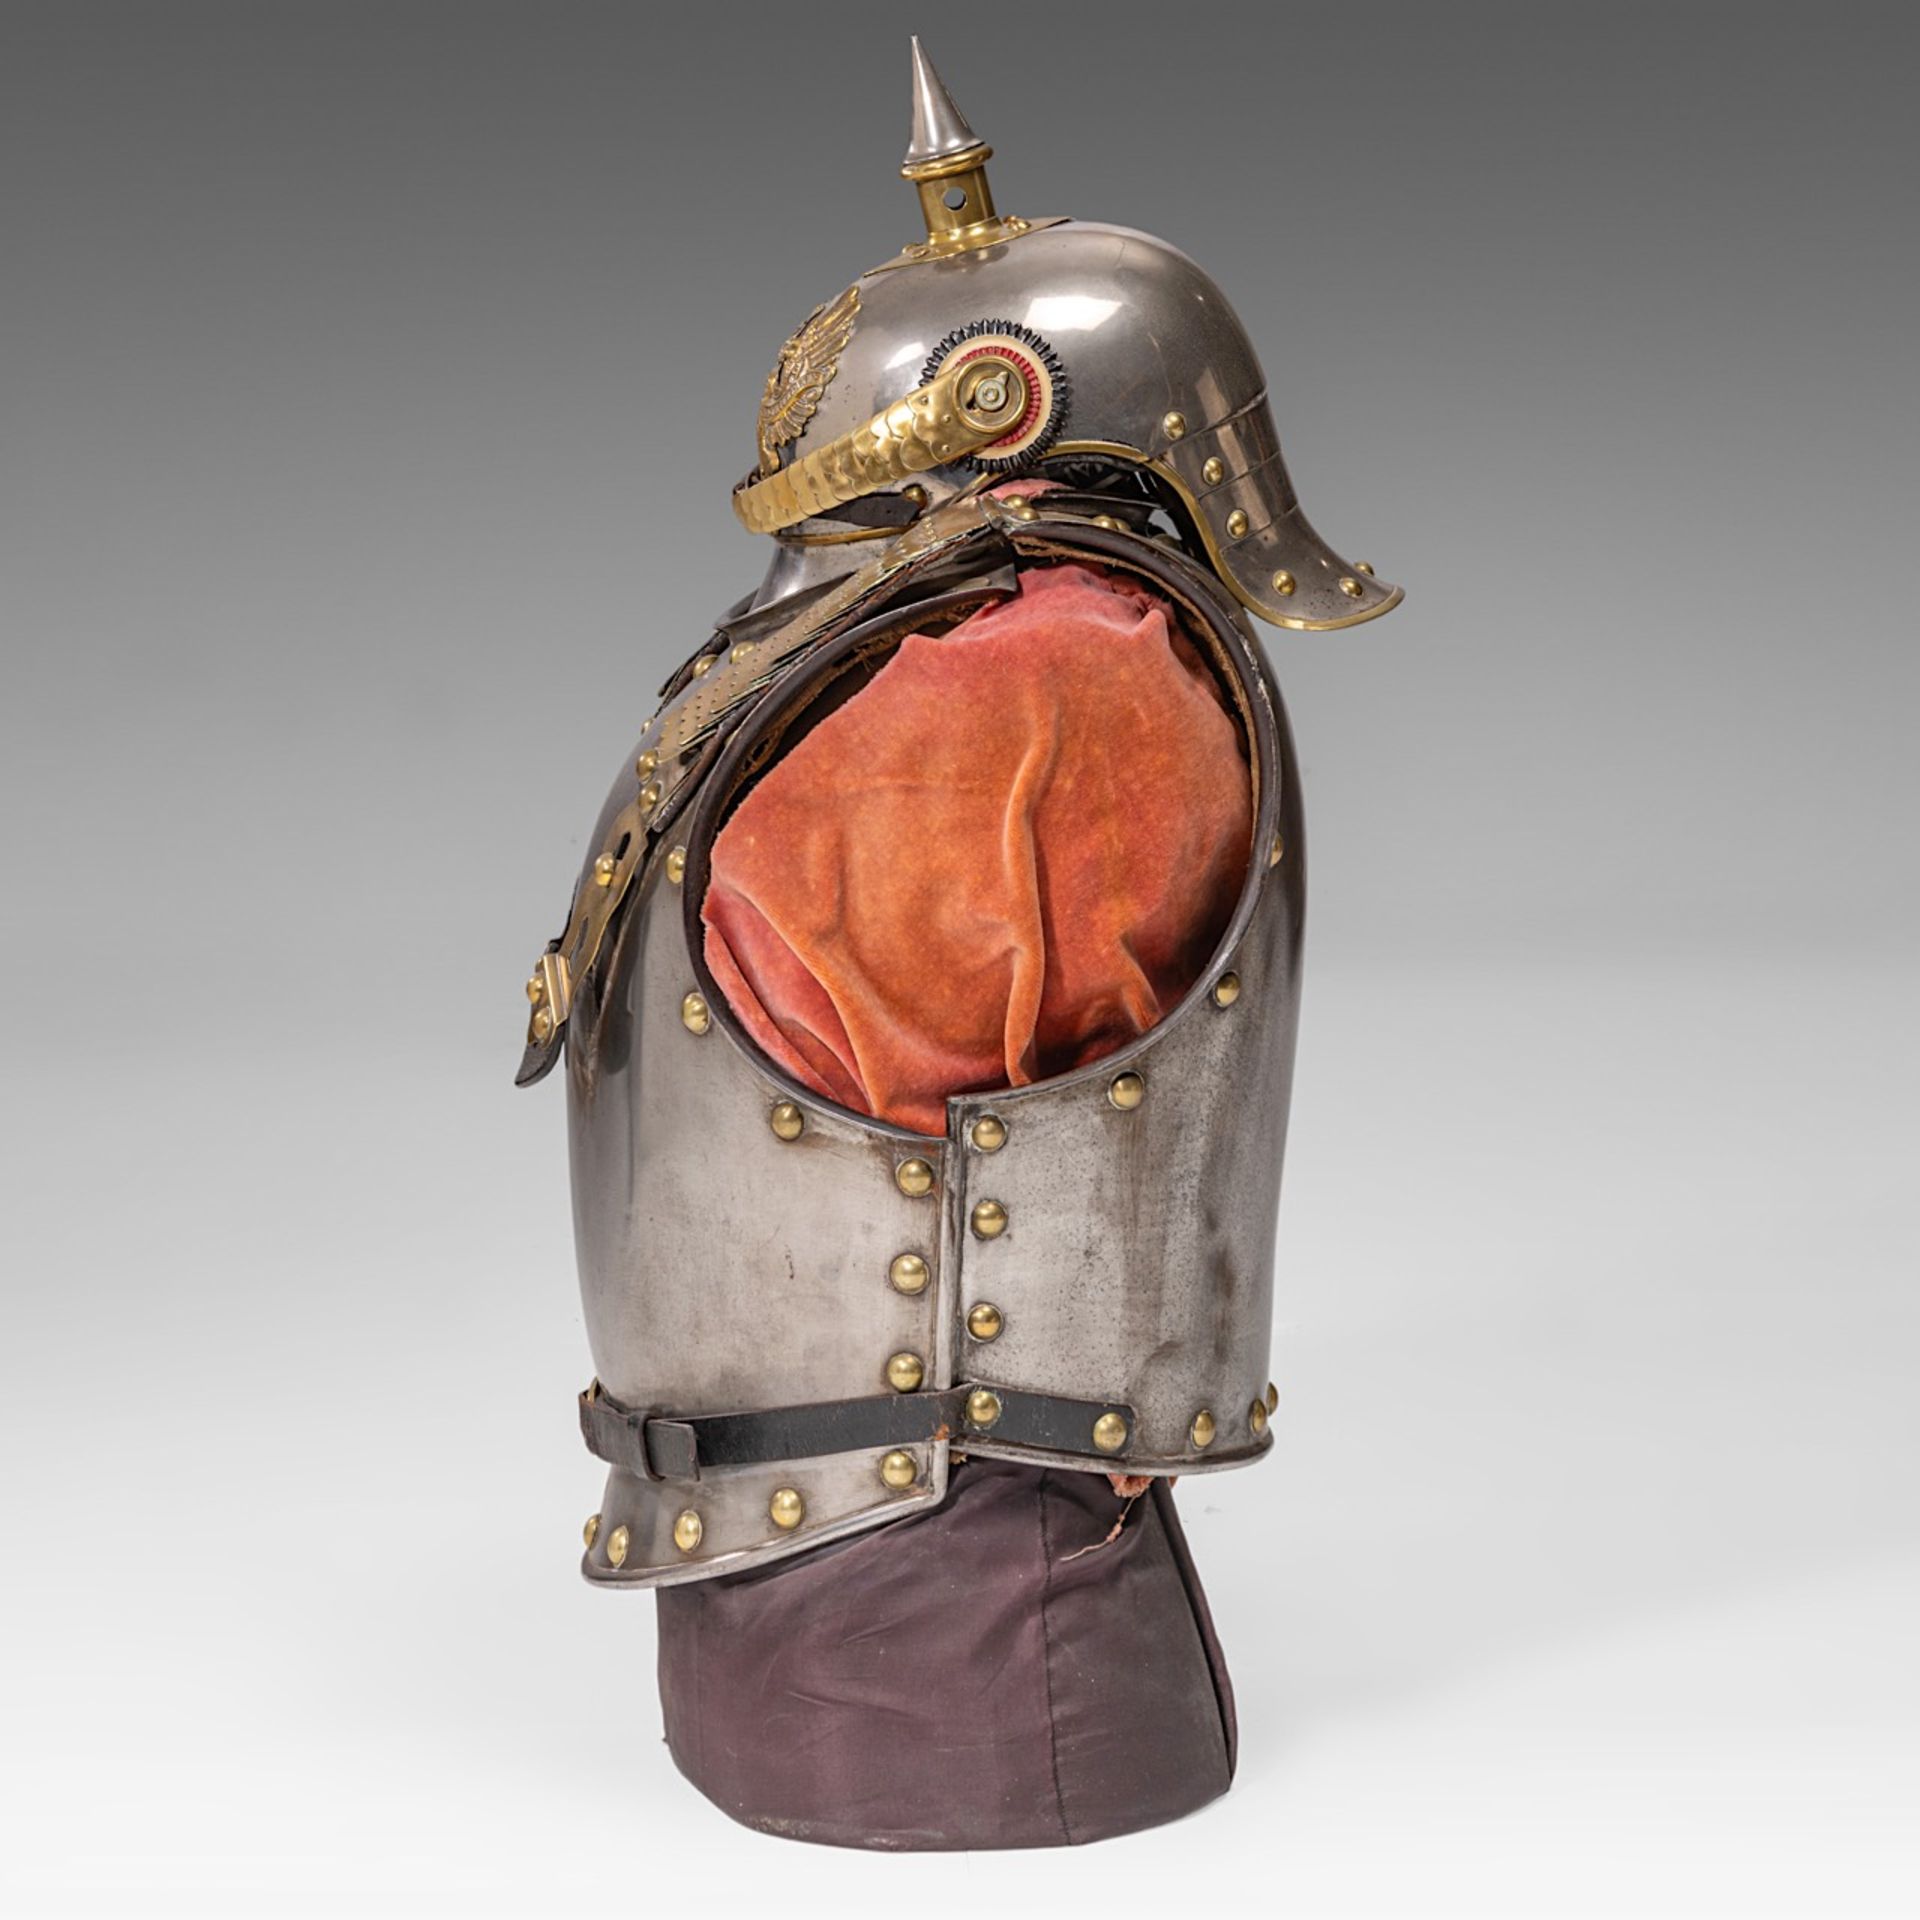 Cuirass and helmet, metal and gilded brass, 19thC., 68 x 30 x 36 cm. (26.7 x 11.8 x 14.1 in.) - Image 3 of 8